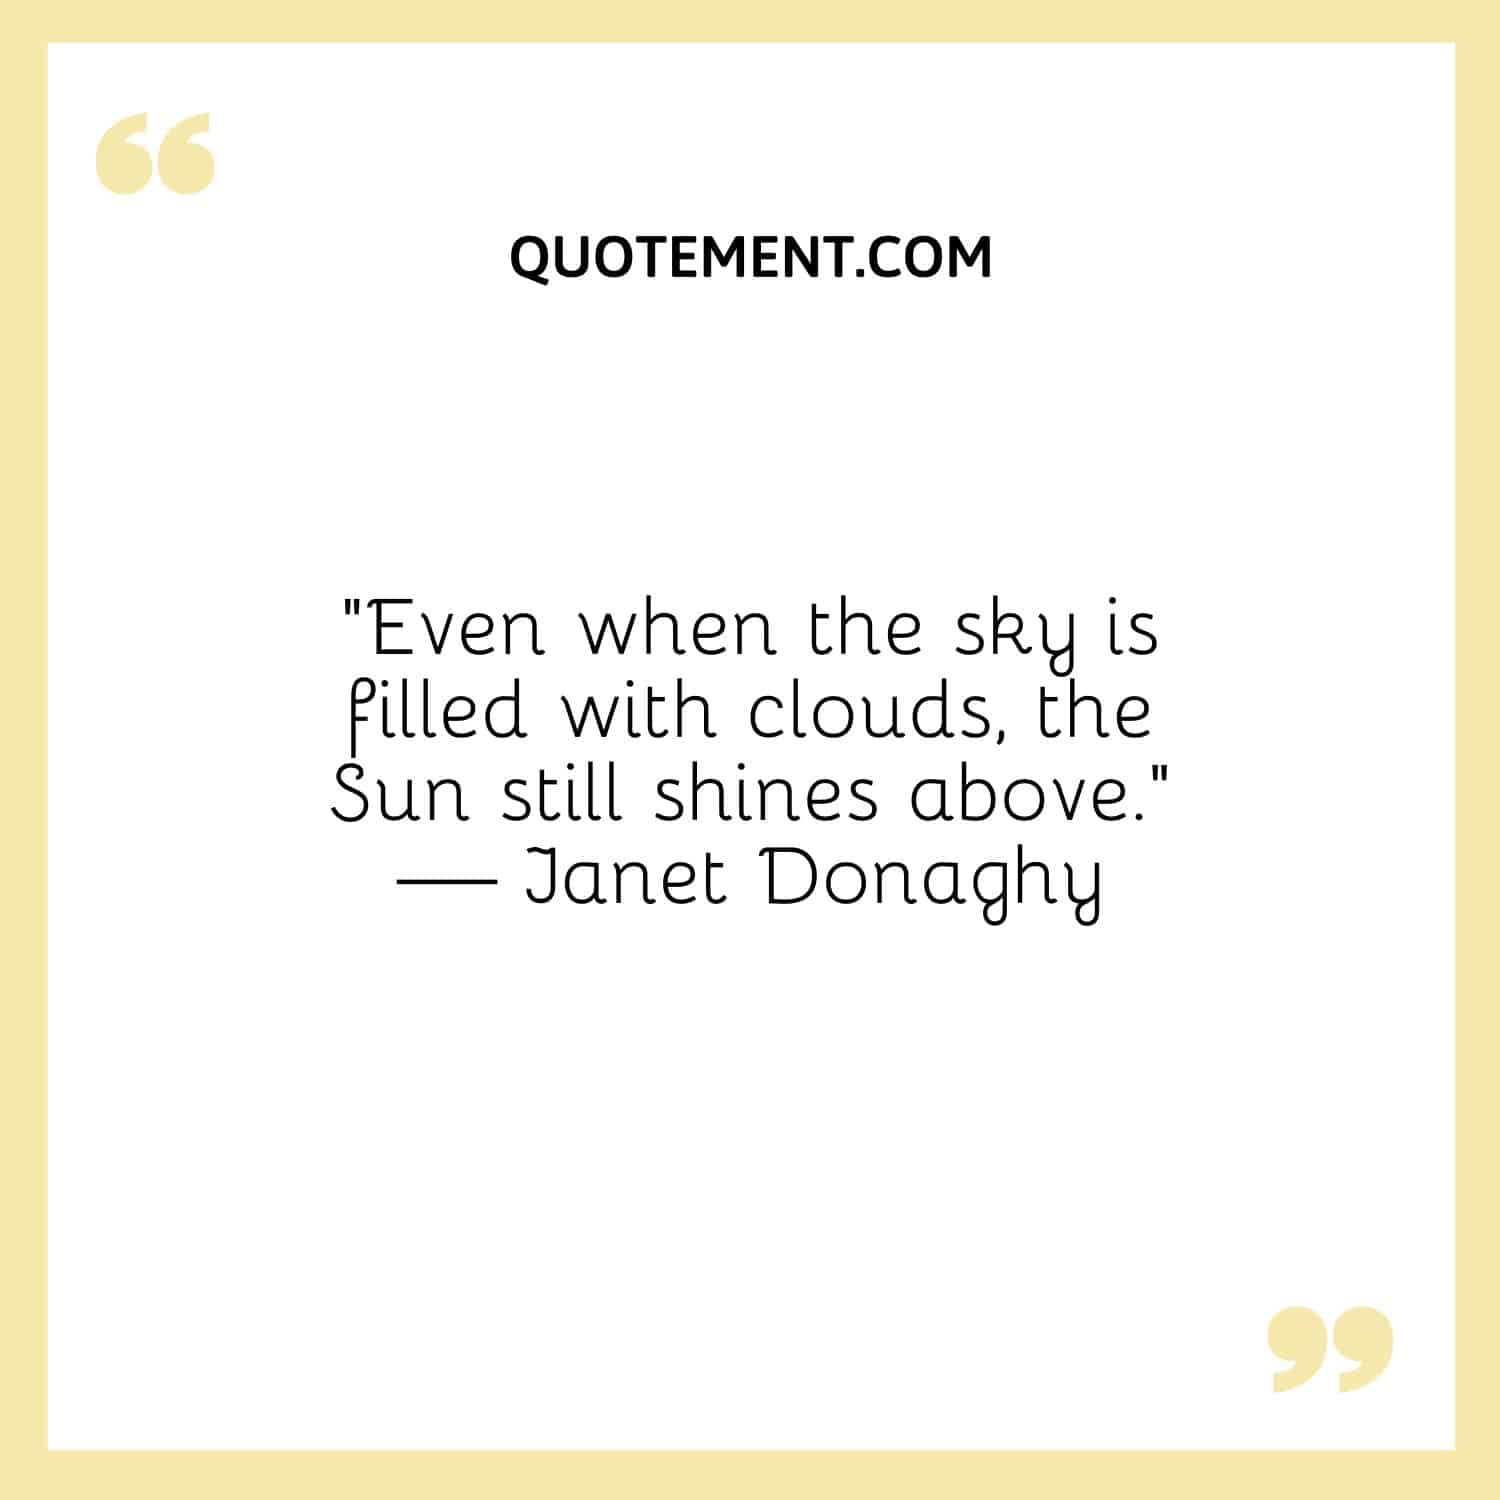 “Even when the sky is filled with clouds, the Sun still shines above.” — Janet Donaghy